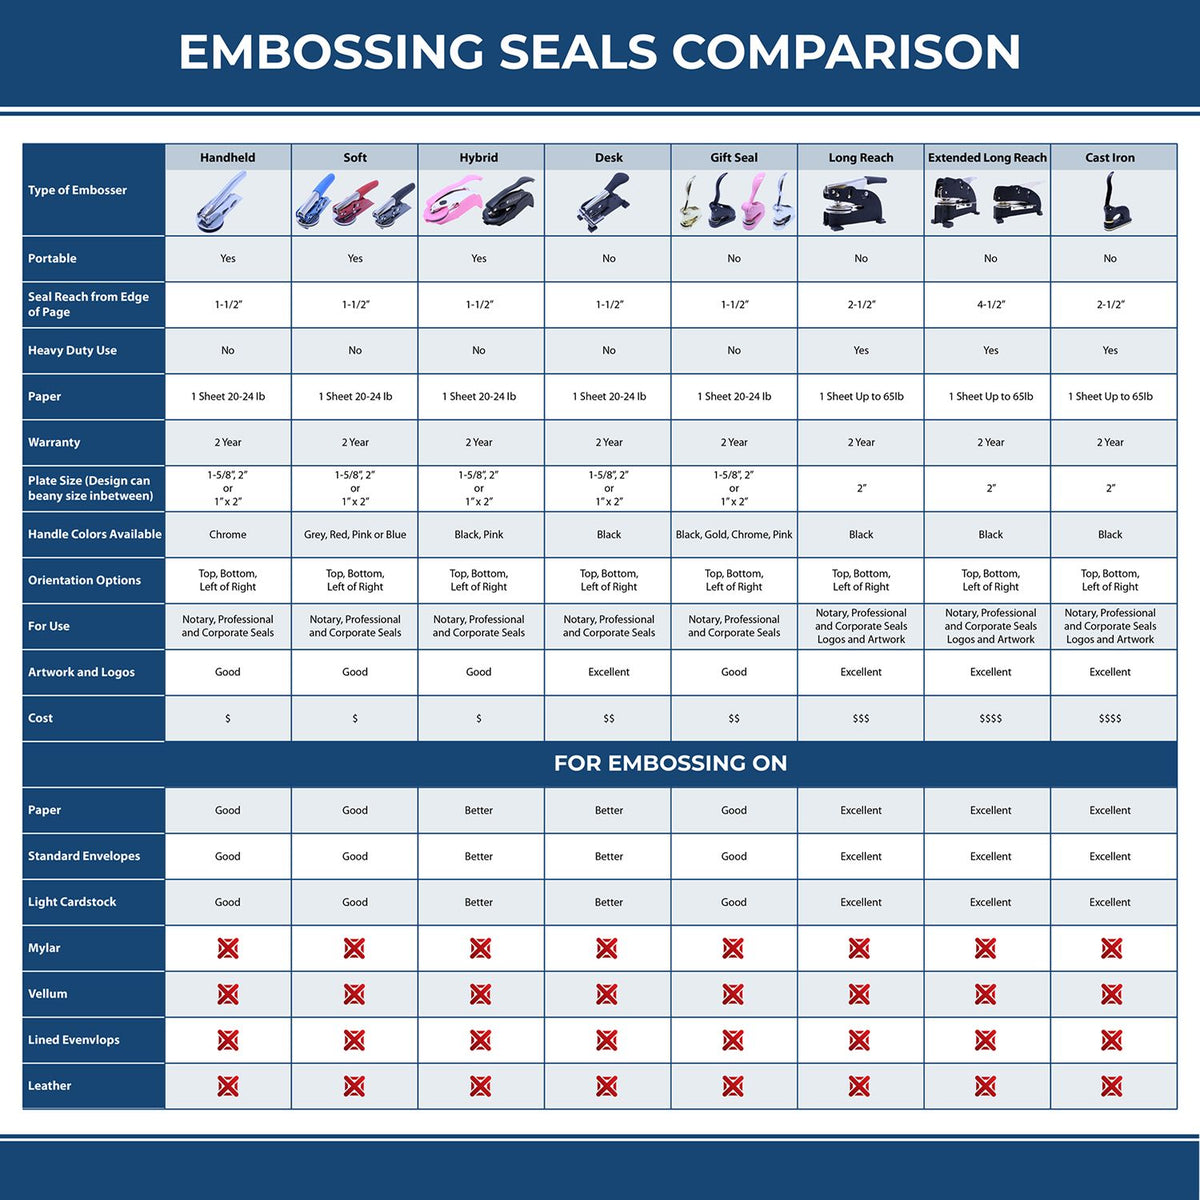 A comparison chart for the different types of mount models available for the Heavy Duty Cast Iron Guam Land Surveyor Seal Embosser.